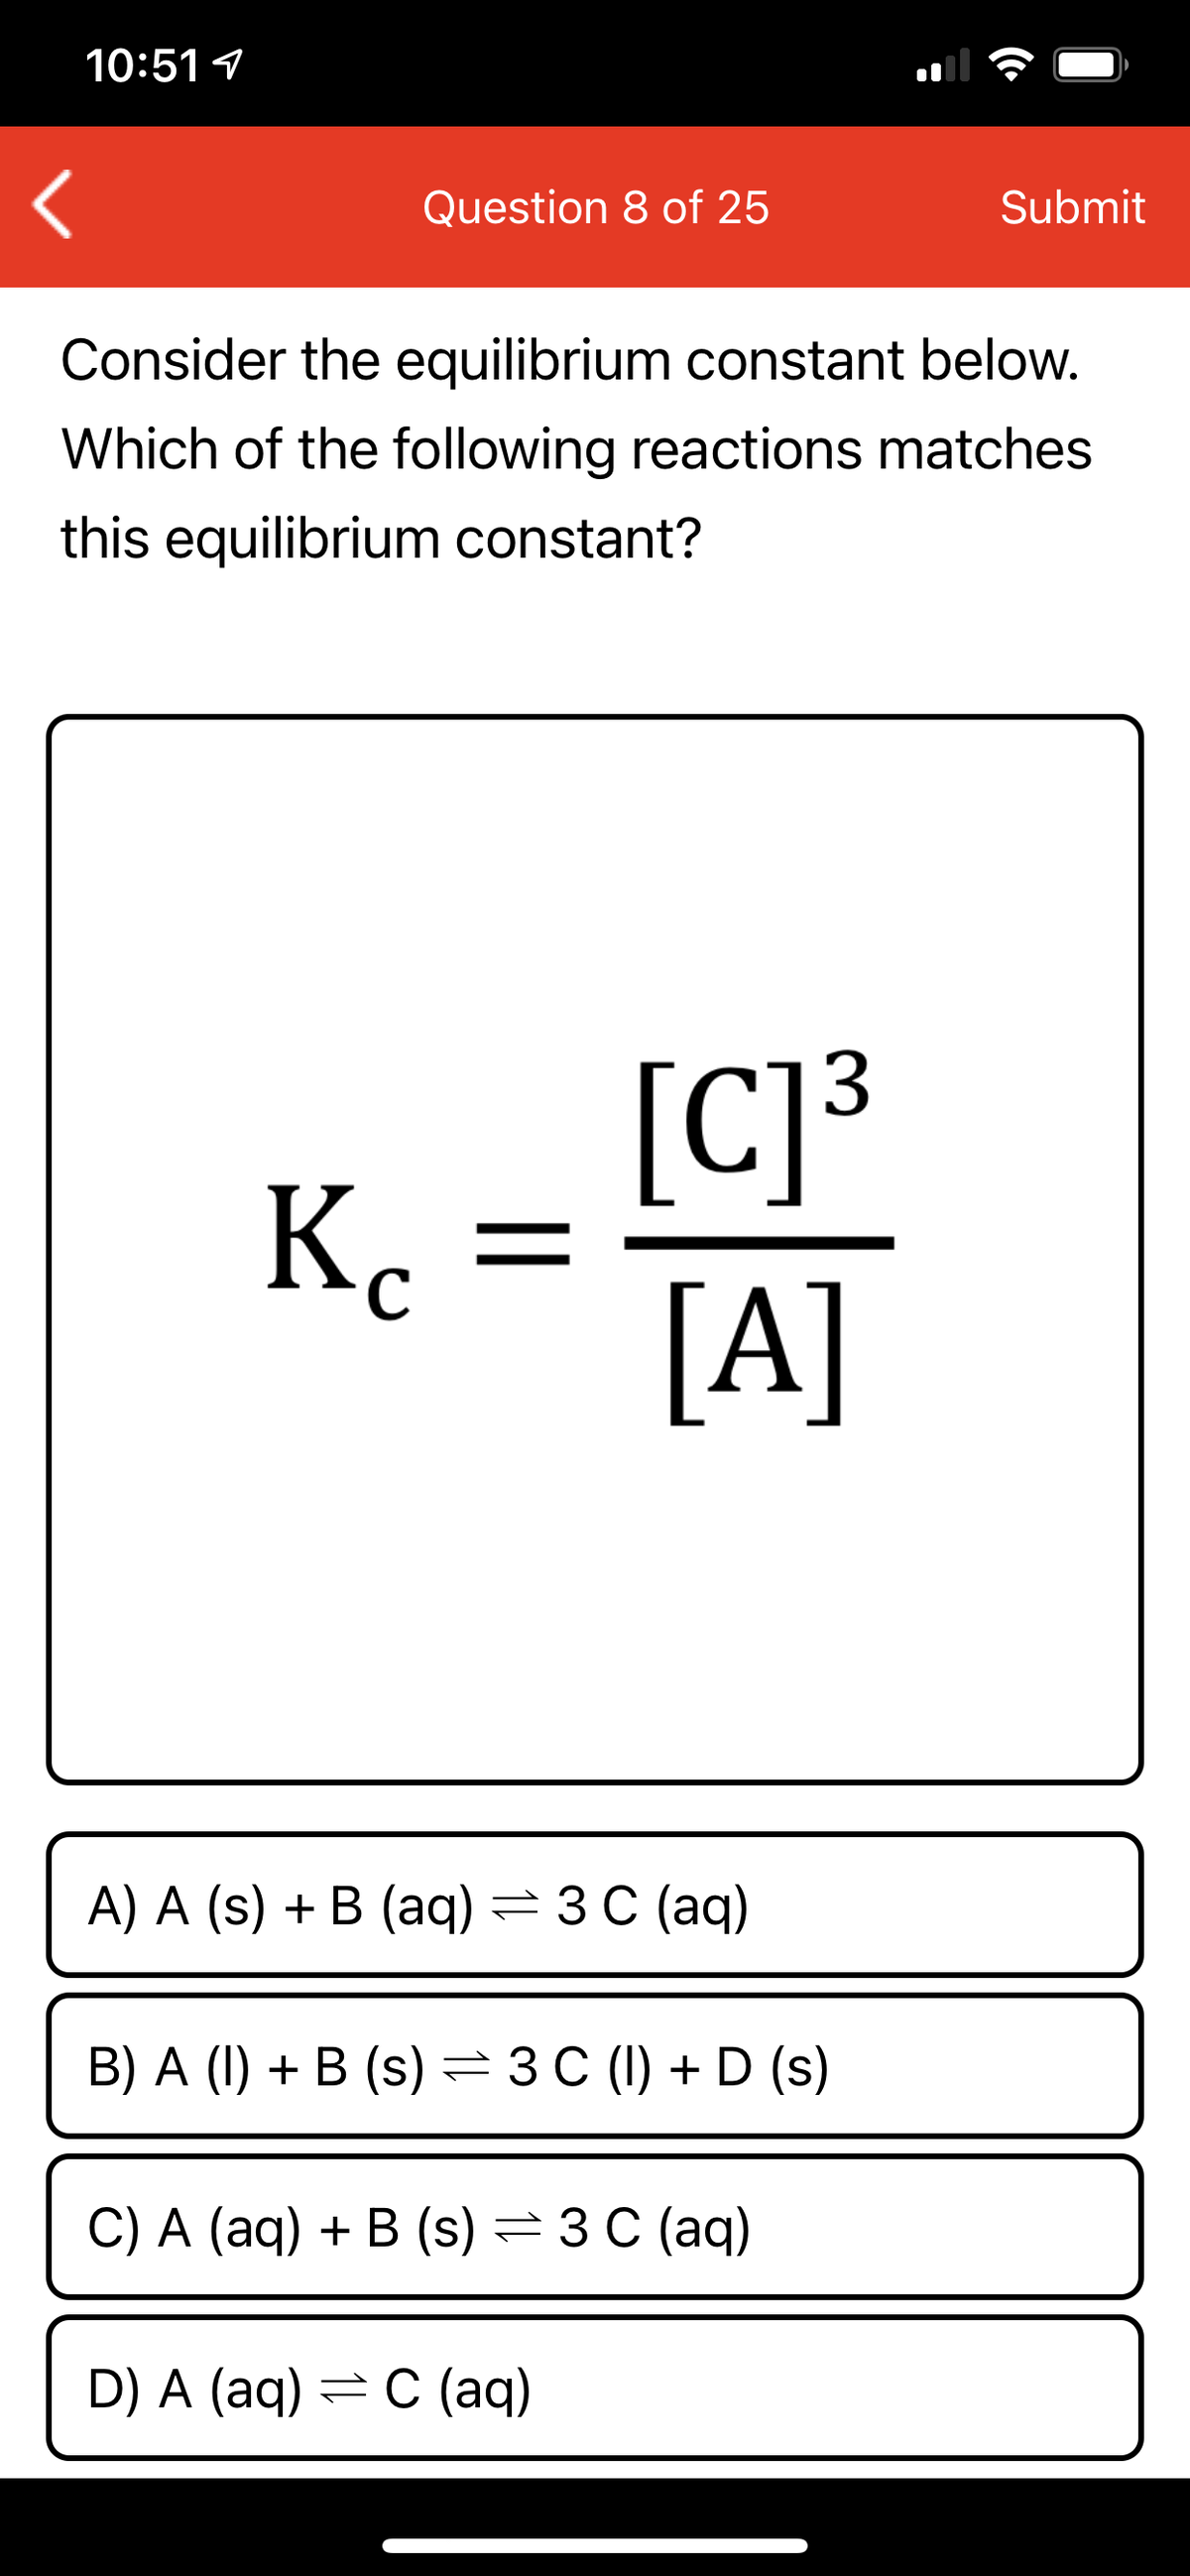 10:51 1
Question 8 of 25
Submit
Consider the equilibrium constant below.
Which of the following reactions matches
this equilibrium constant?
[C]³
K.
[A]
А) A (s) + B (аq) — 3 С (аq)
B) A (I) + B (s) =3 C (1) + D (s)
C) A (ag) + B (s) — 3С (аq)
D) A (aq) =C (aq)
